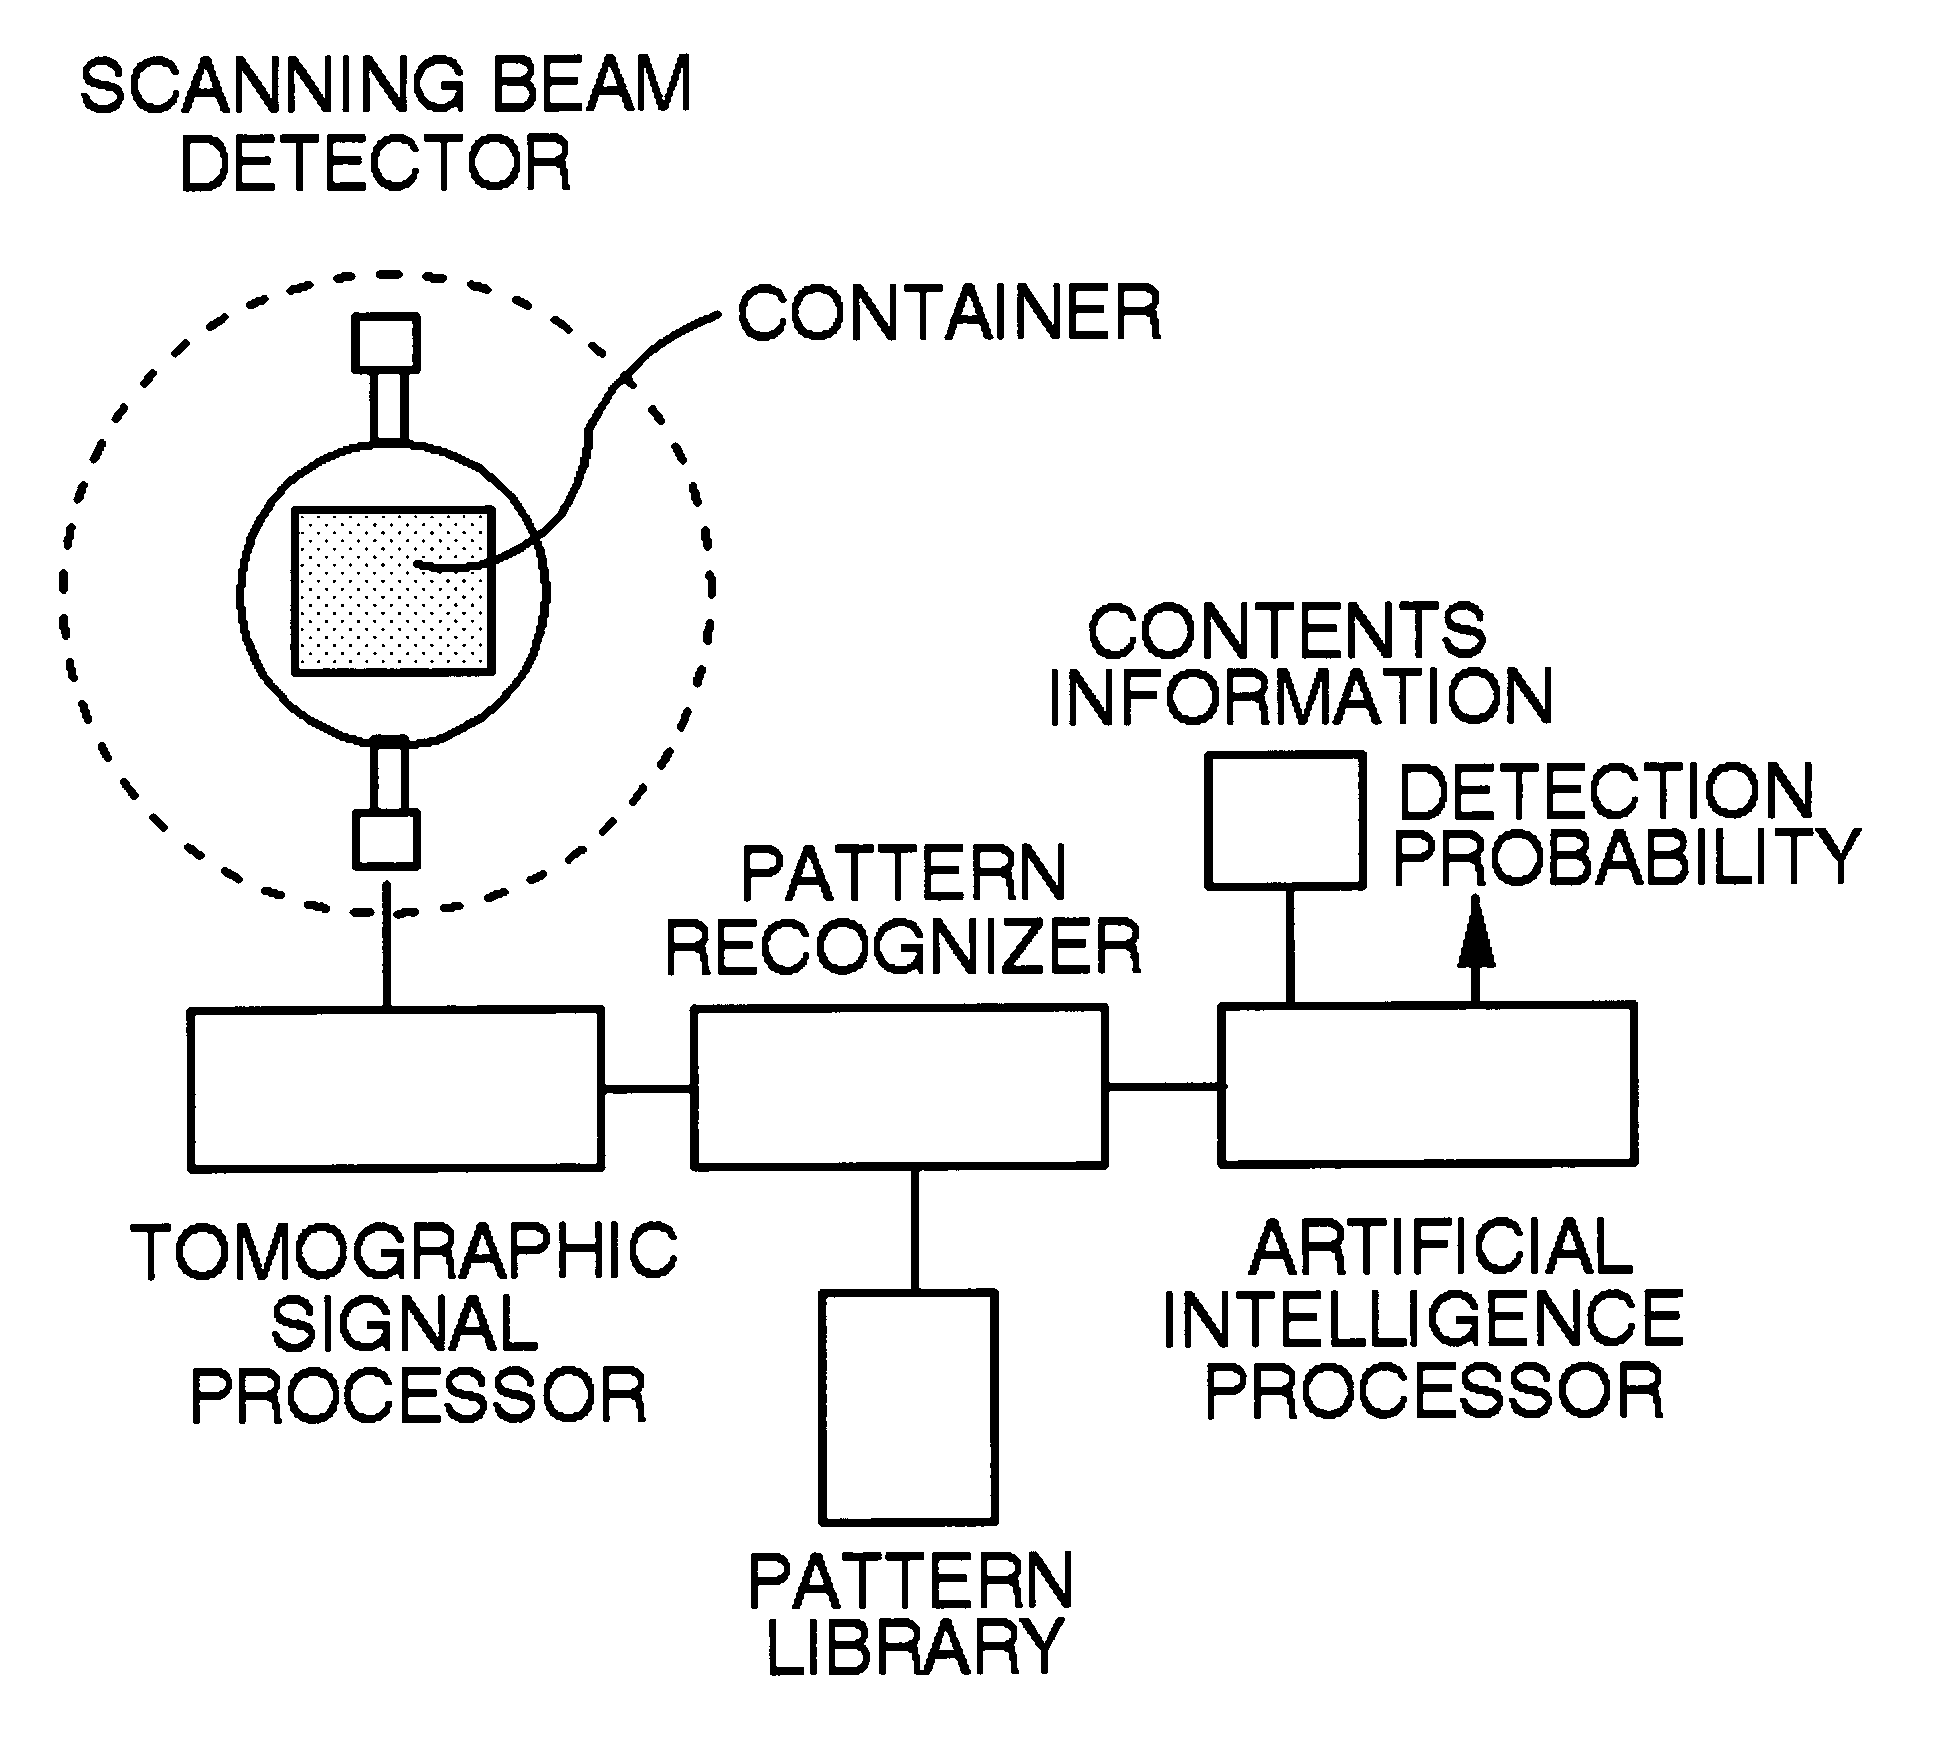 System and method for detecting nuclear material in shipping containers